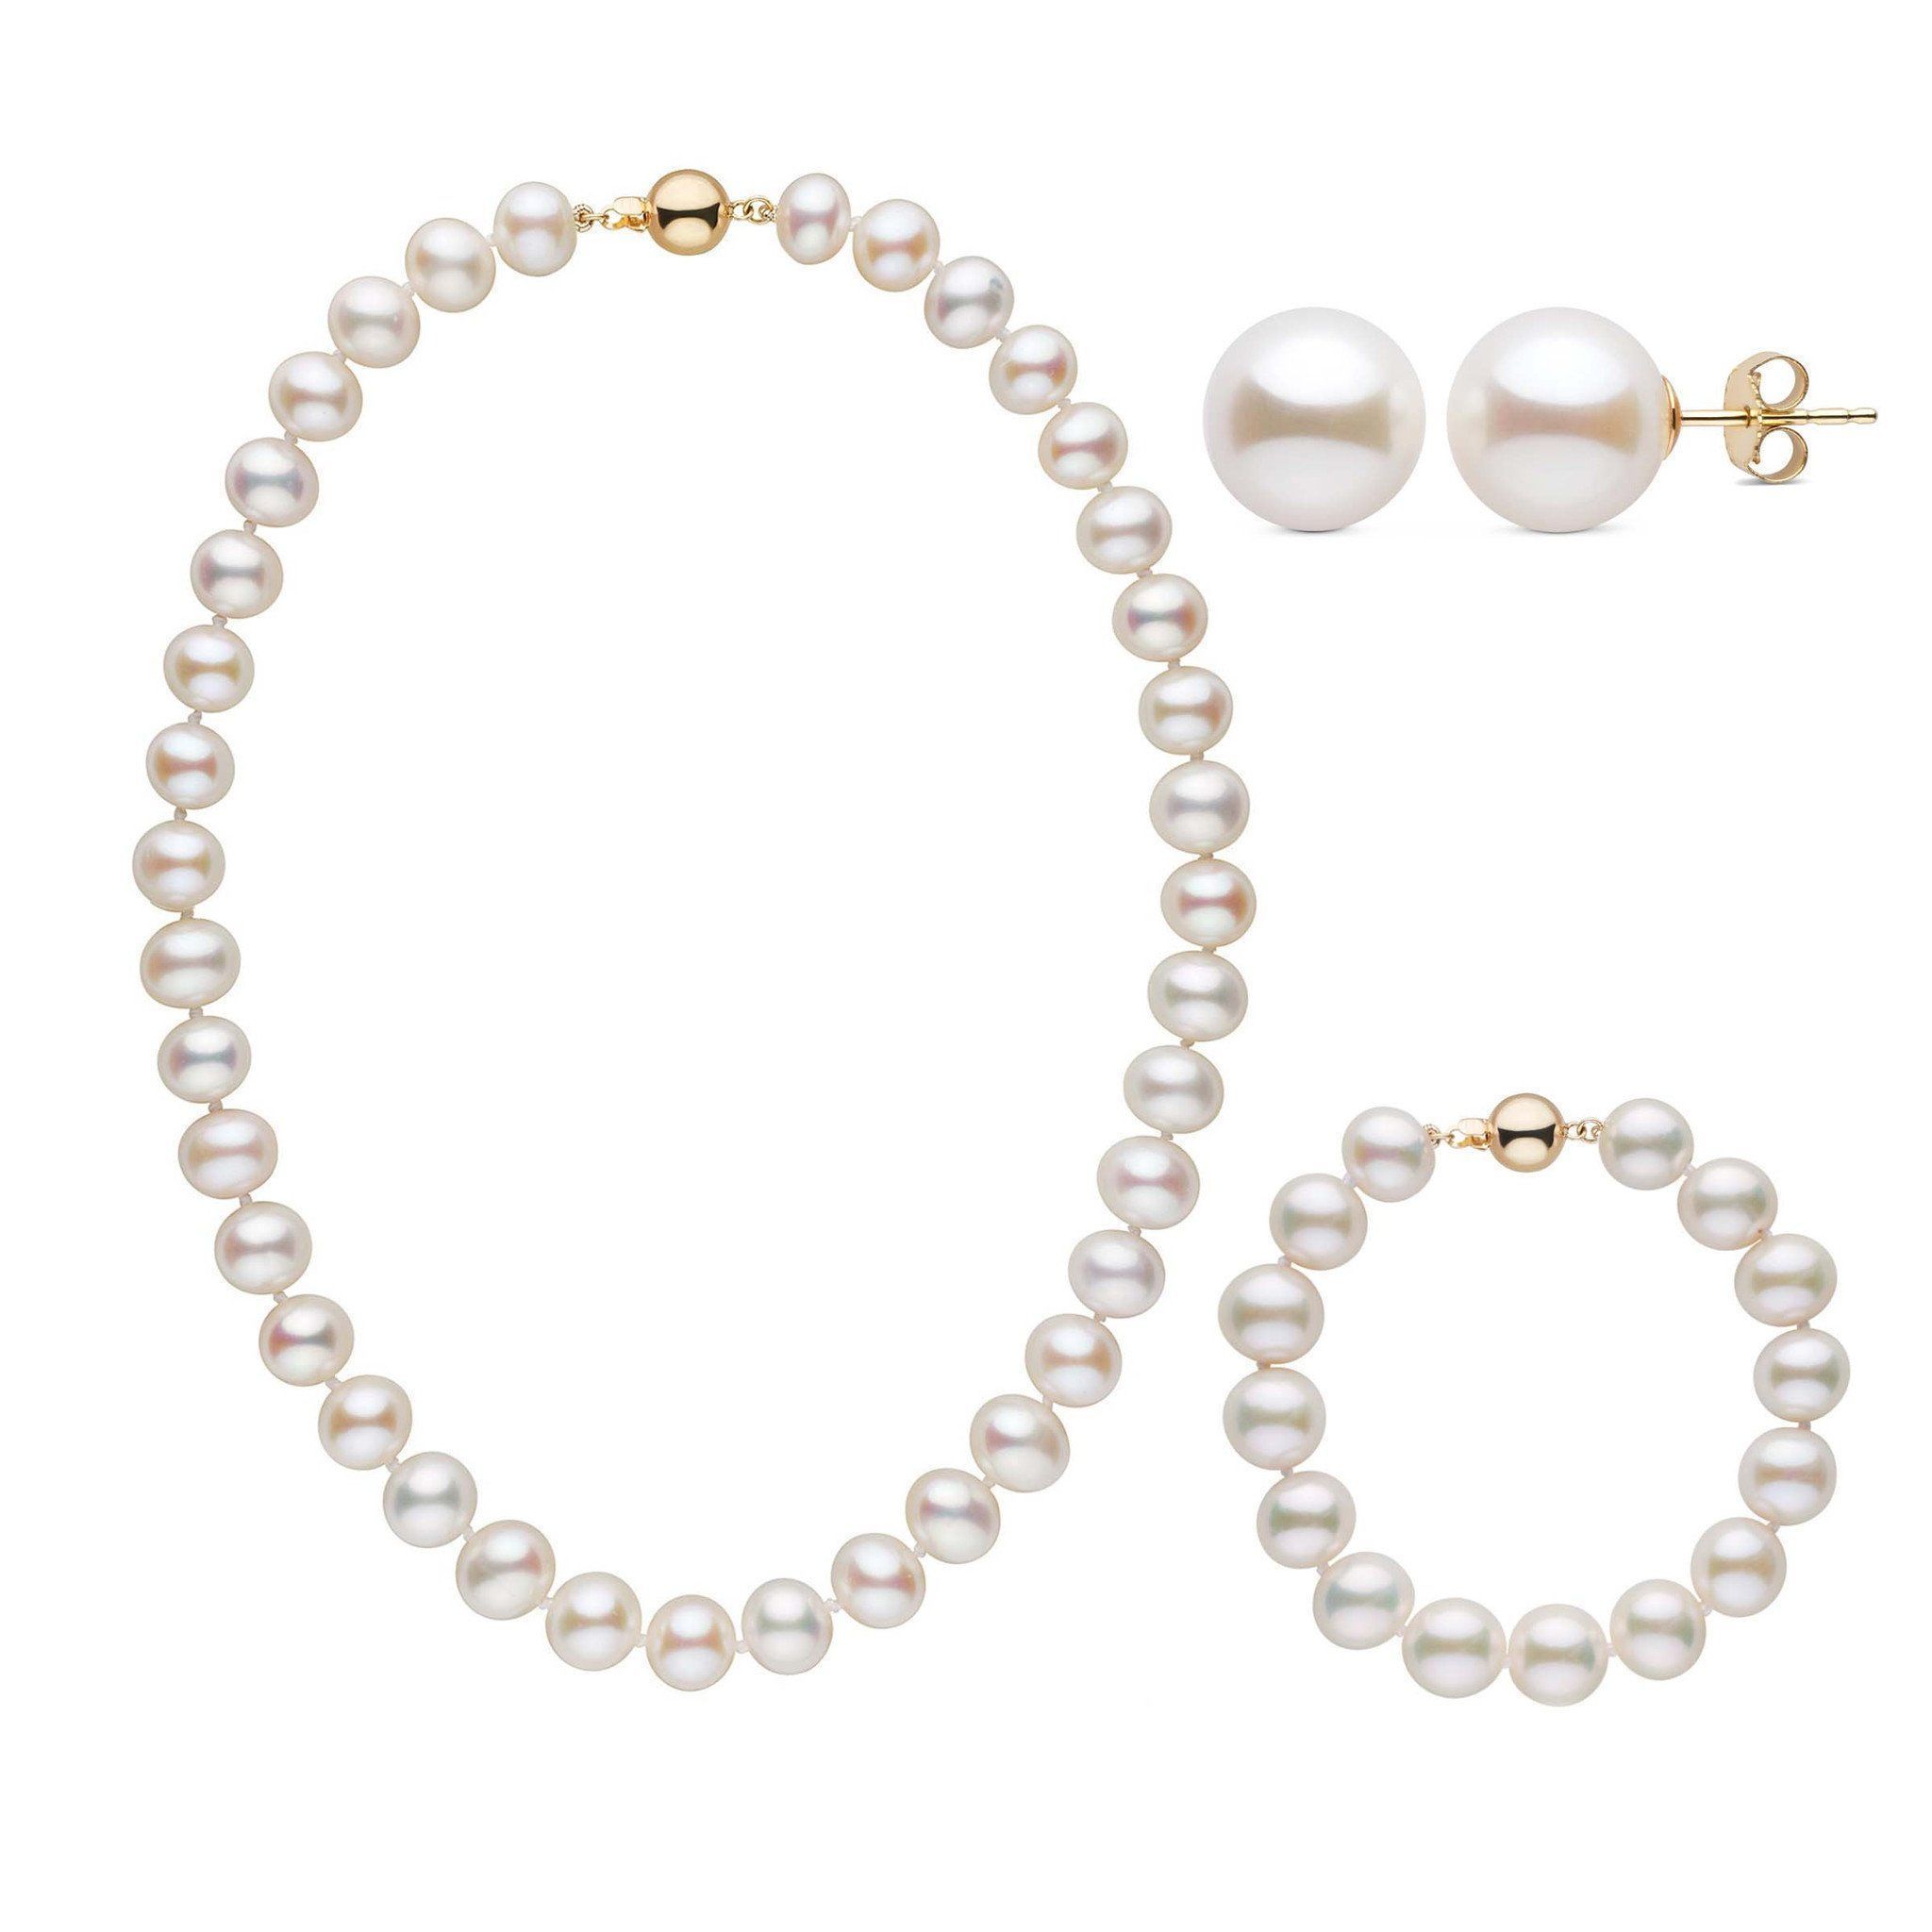 Necklace bracelet and earrings 9.5-10.5 mm AA+ White Freshwater Pearl Set